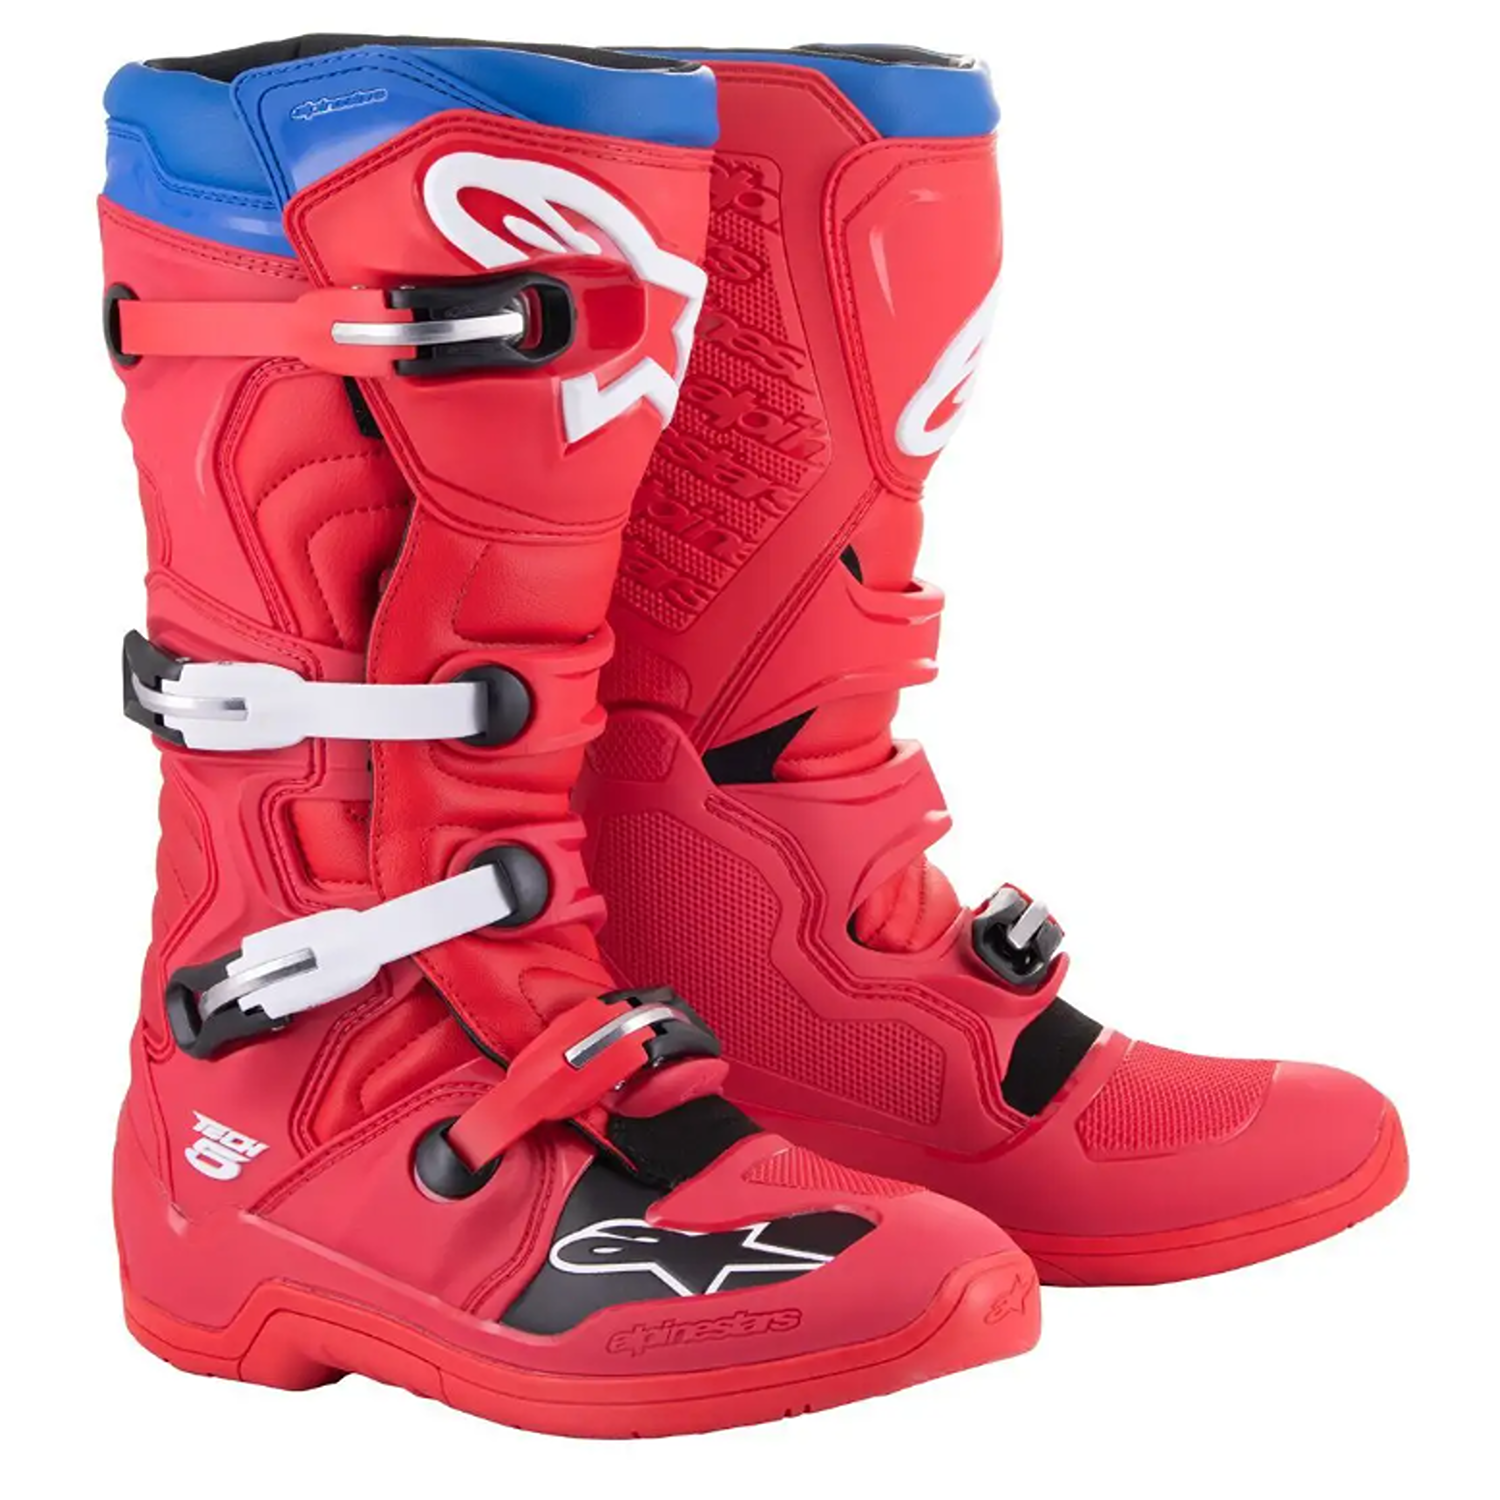 Image of Alpinestars Tech 5 Boots Bright Red Dark Red Blue Size US 16 ID 8059347199412